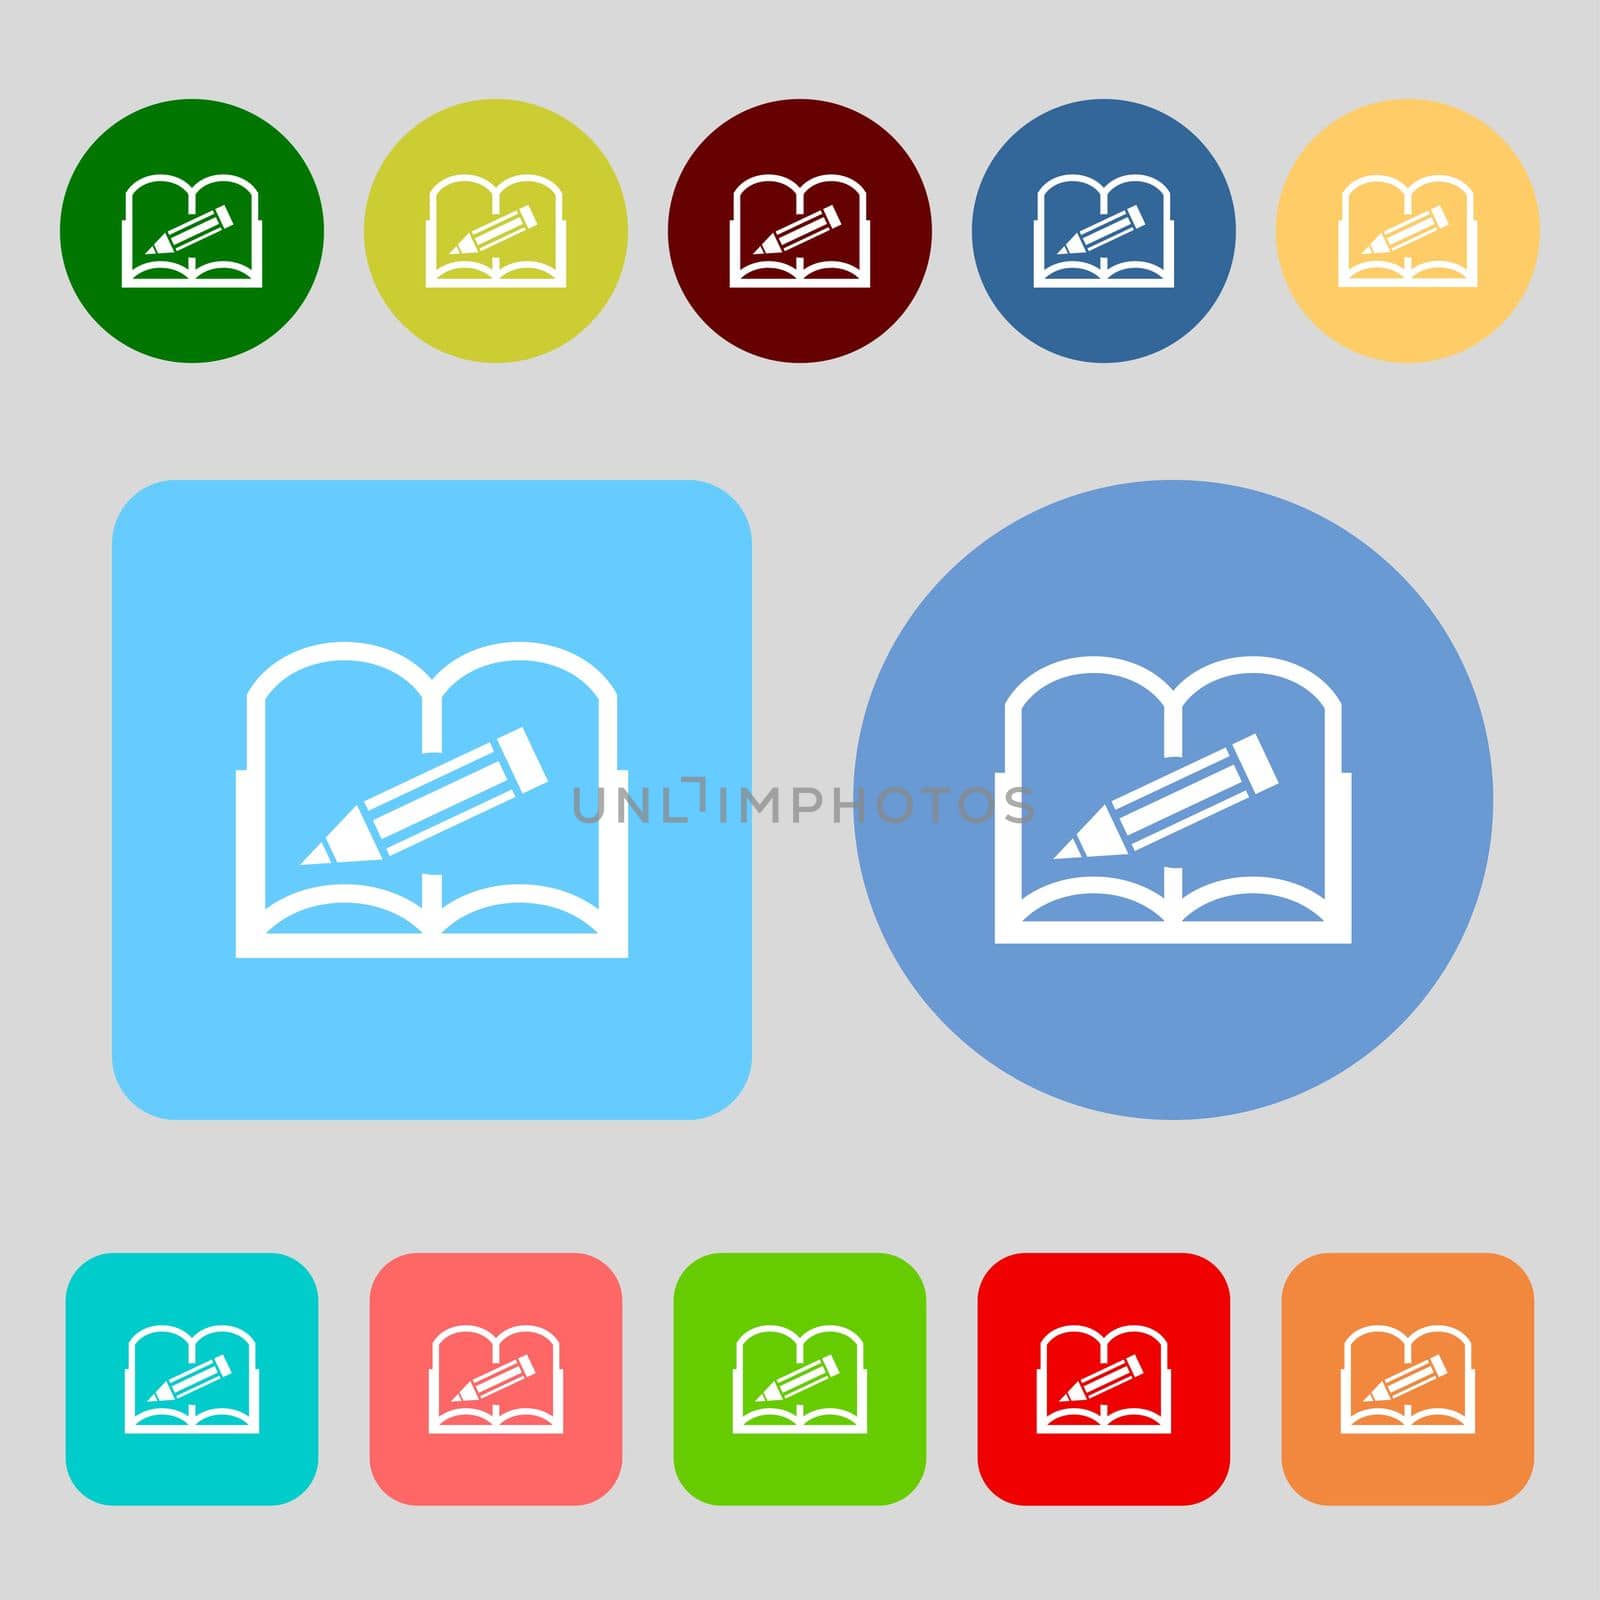 Book sign icon. Open book symbol.12 colored buttons. Flat design. illustration